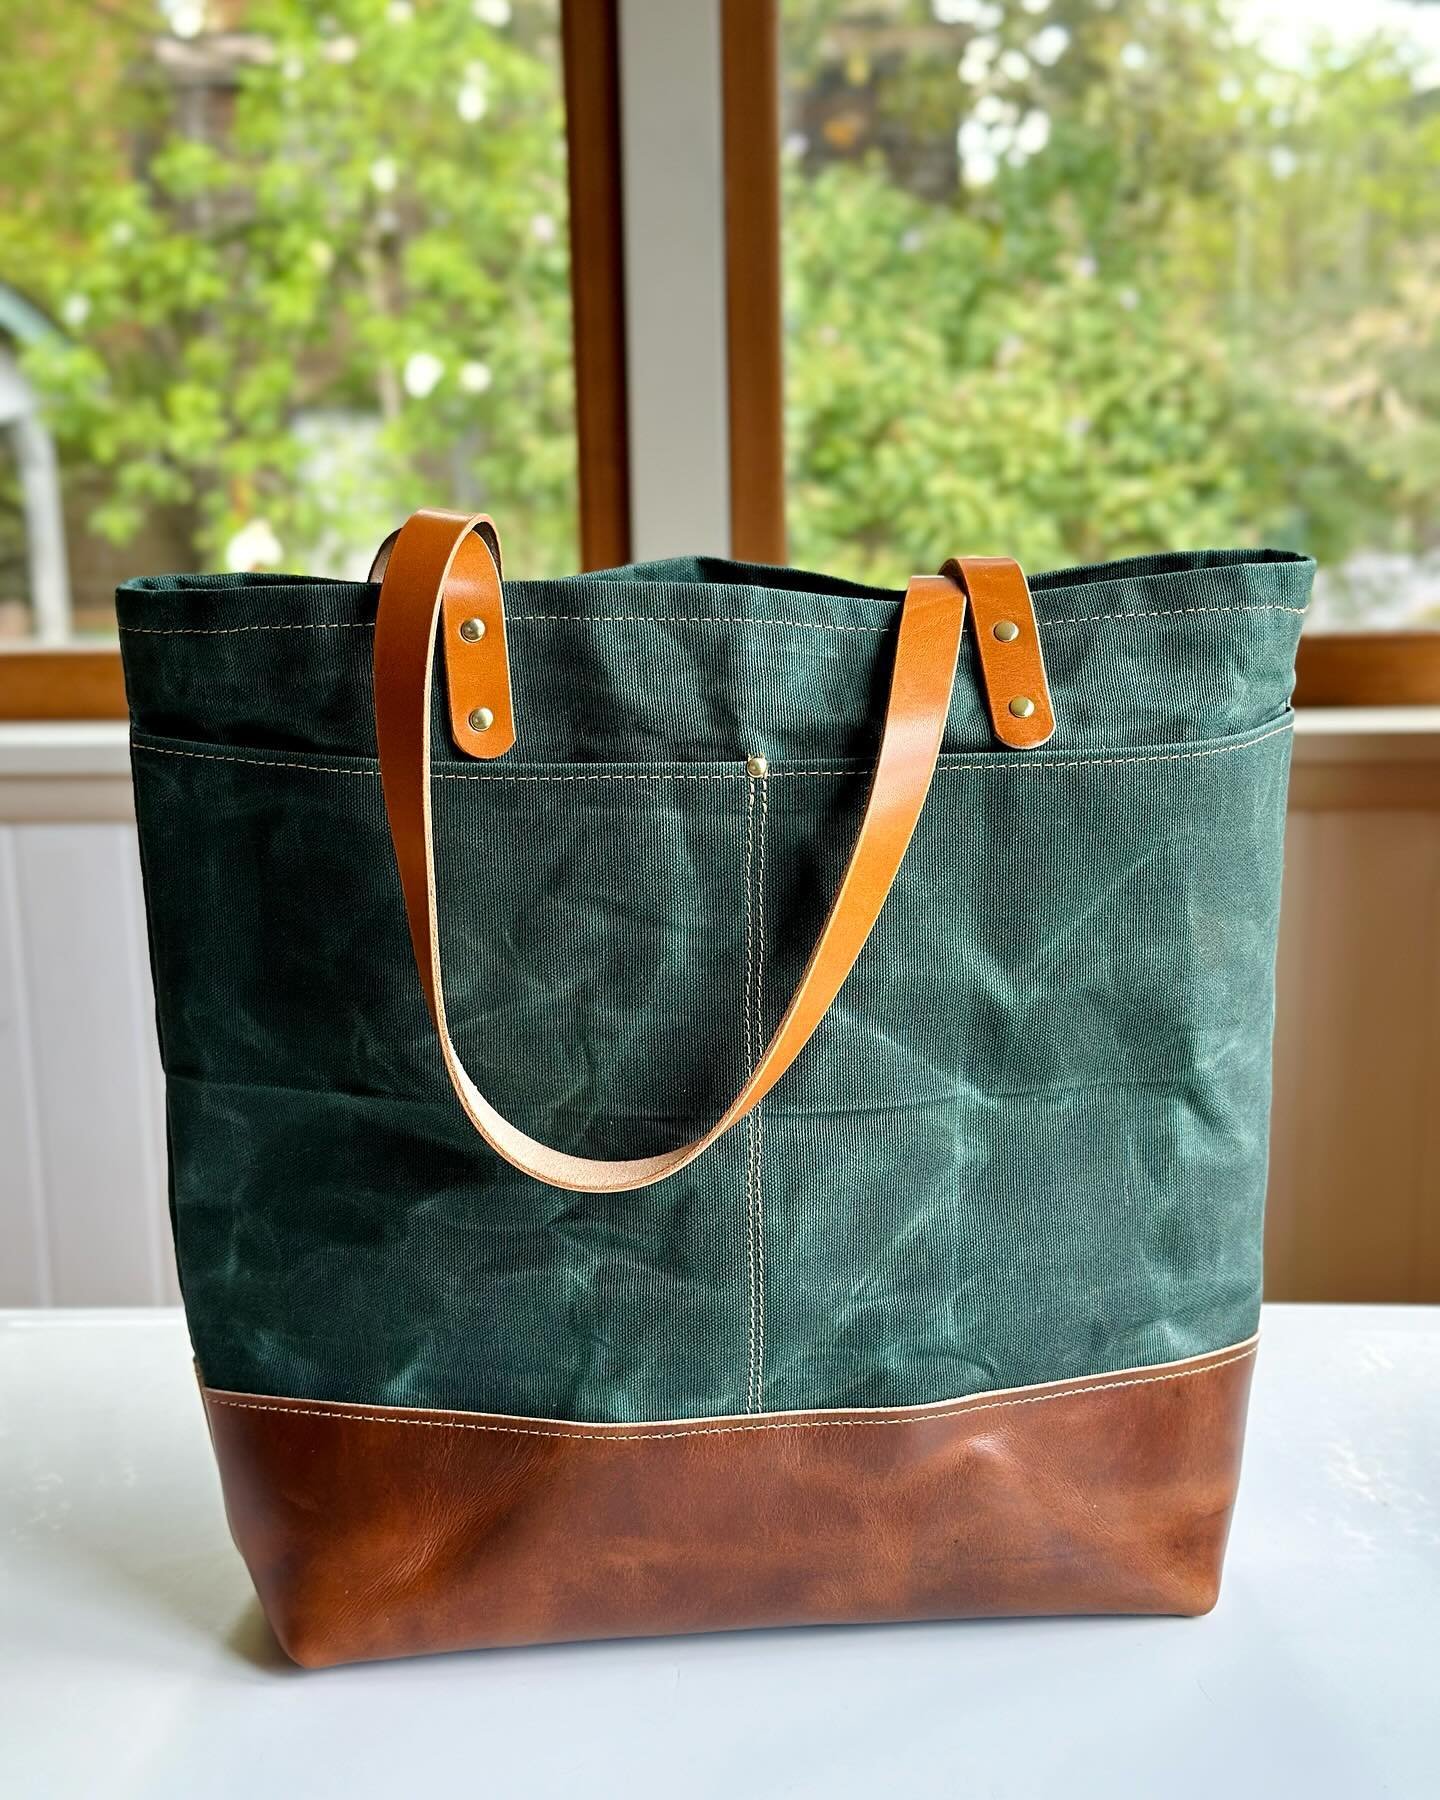 This bag is going to last a long time.  I decided to make a few of these waxed canvas totes because they are basically the best everyday bags!  Hoping to have a few at the next event, the Camano Island Mothers Day Festival, happening May 10th-12th. ?